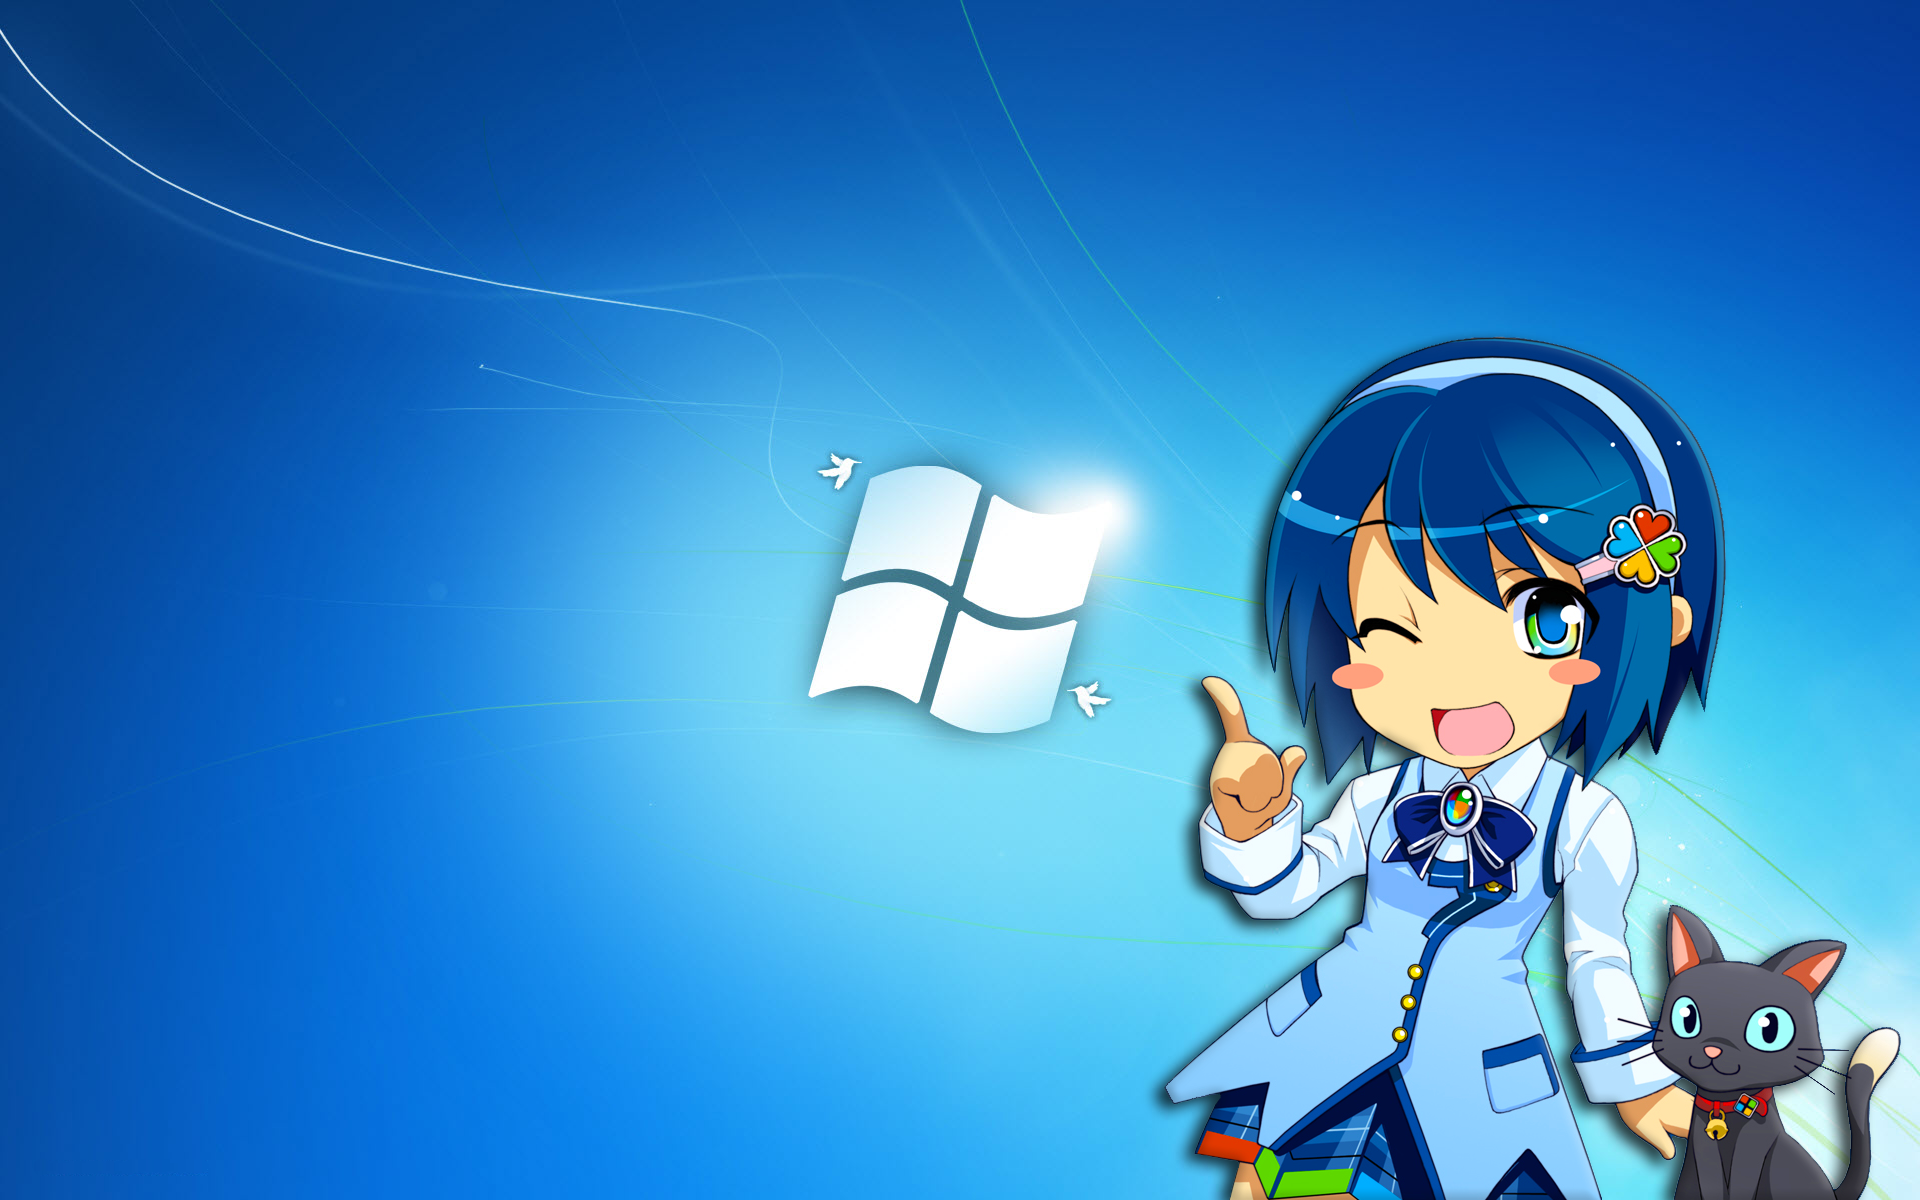 Windows 7 Anime Girl with Cat - Wallpaper